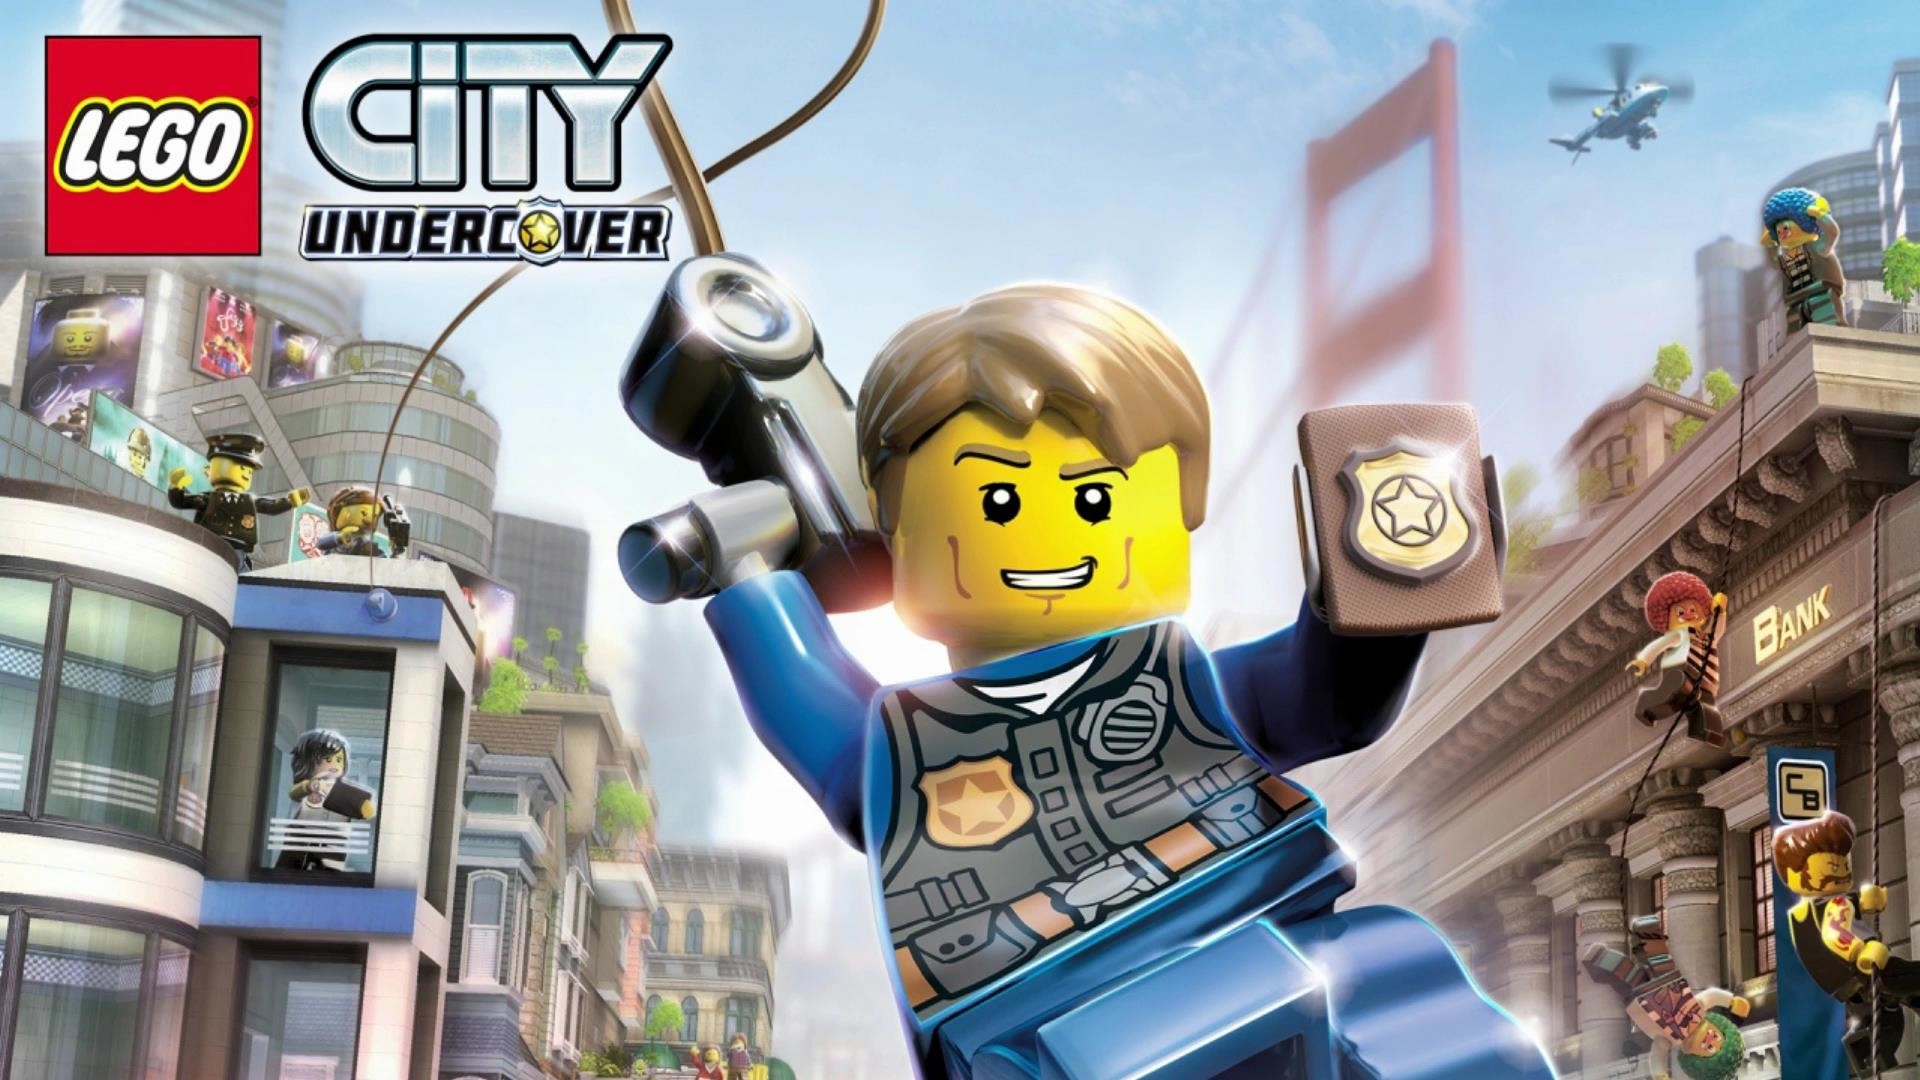 1920x1080 With just a few days to go before launch, screenshots from the Switch  version of LEGO City Undercover have appeared from the game's eShop listing.